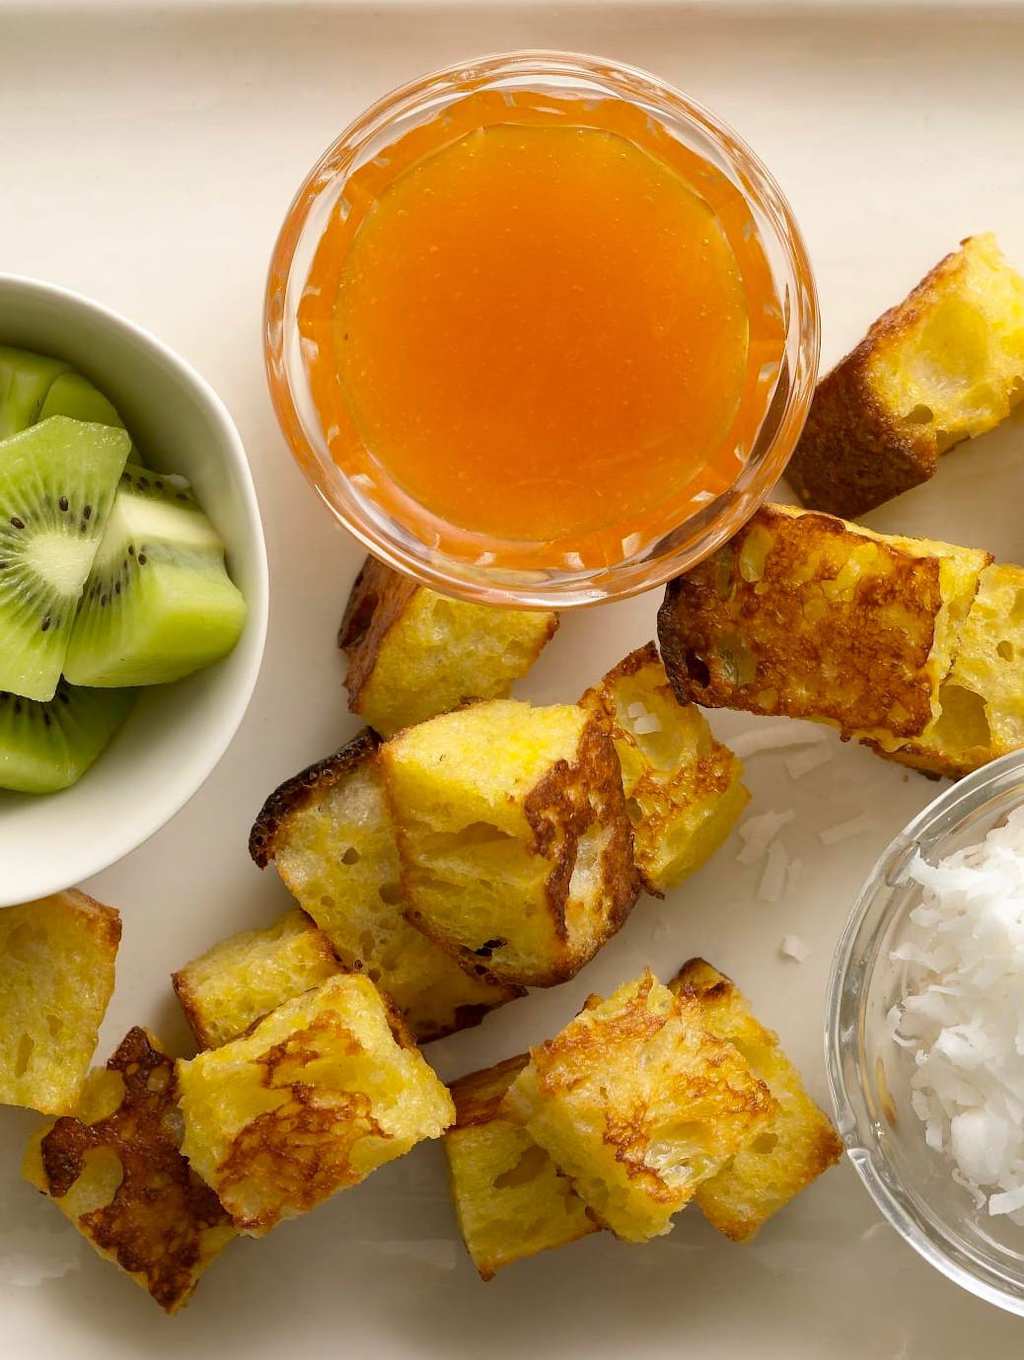 Oven baked French toast fondue makes a brunch much more fun and delicious.